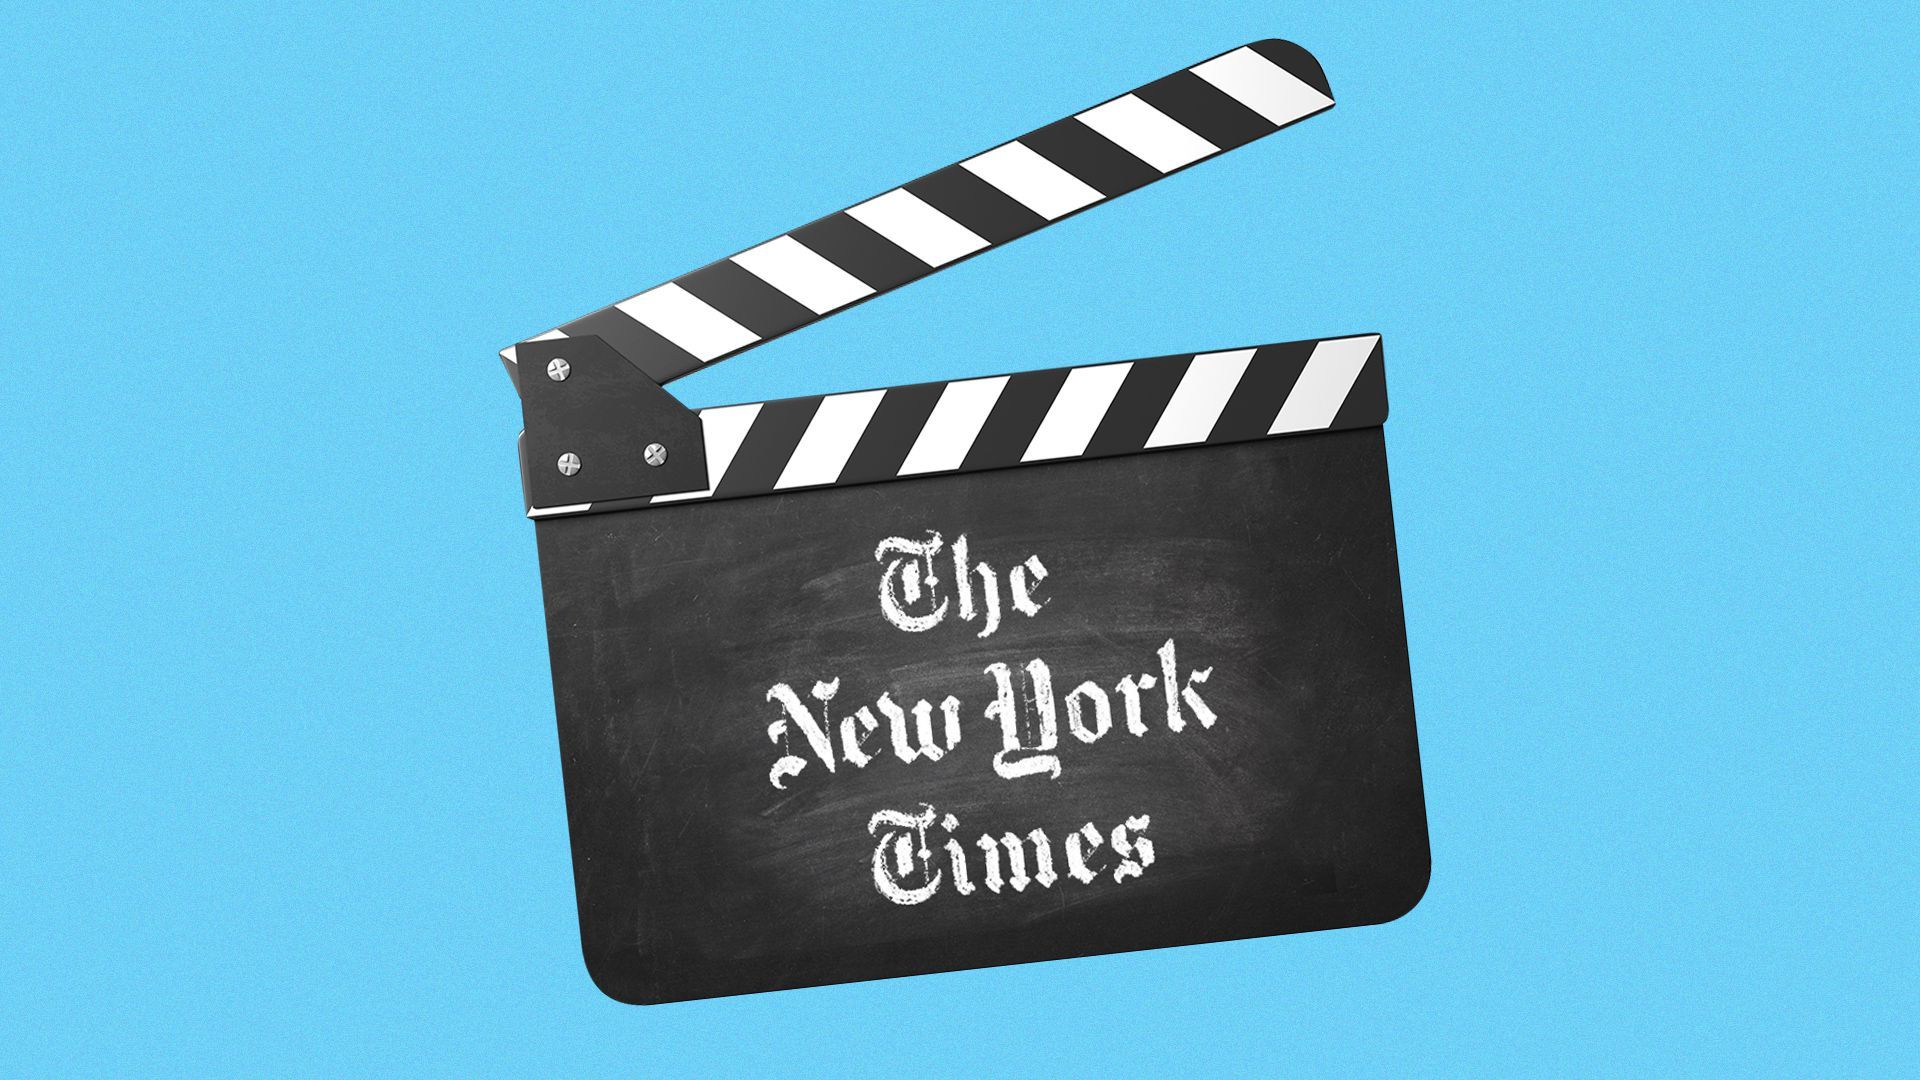 Illustration of "The New York Times" logo written in chalk on a film clapperboard.